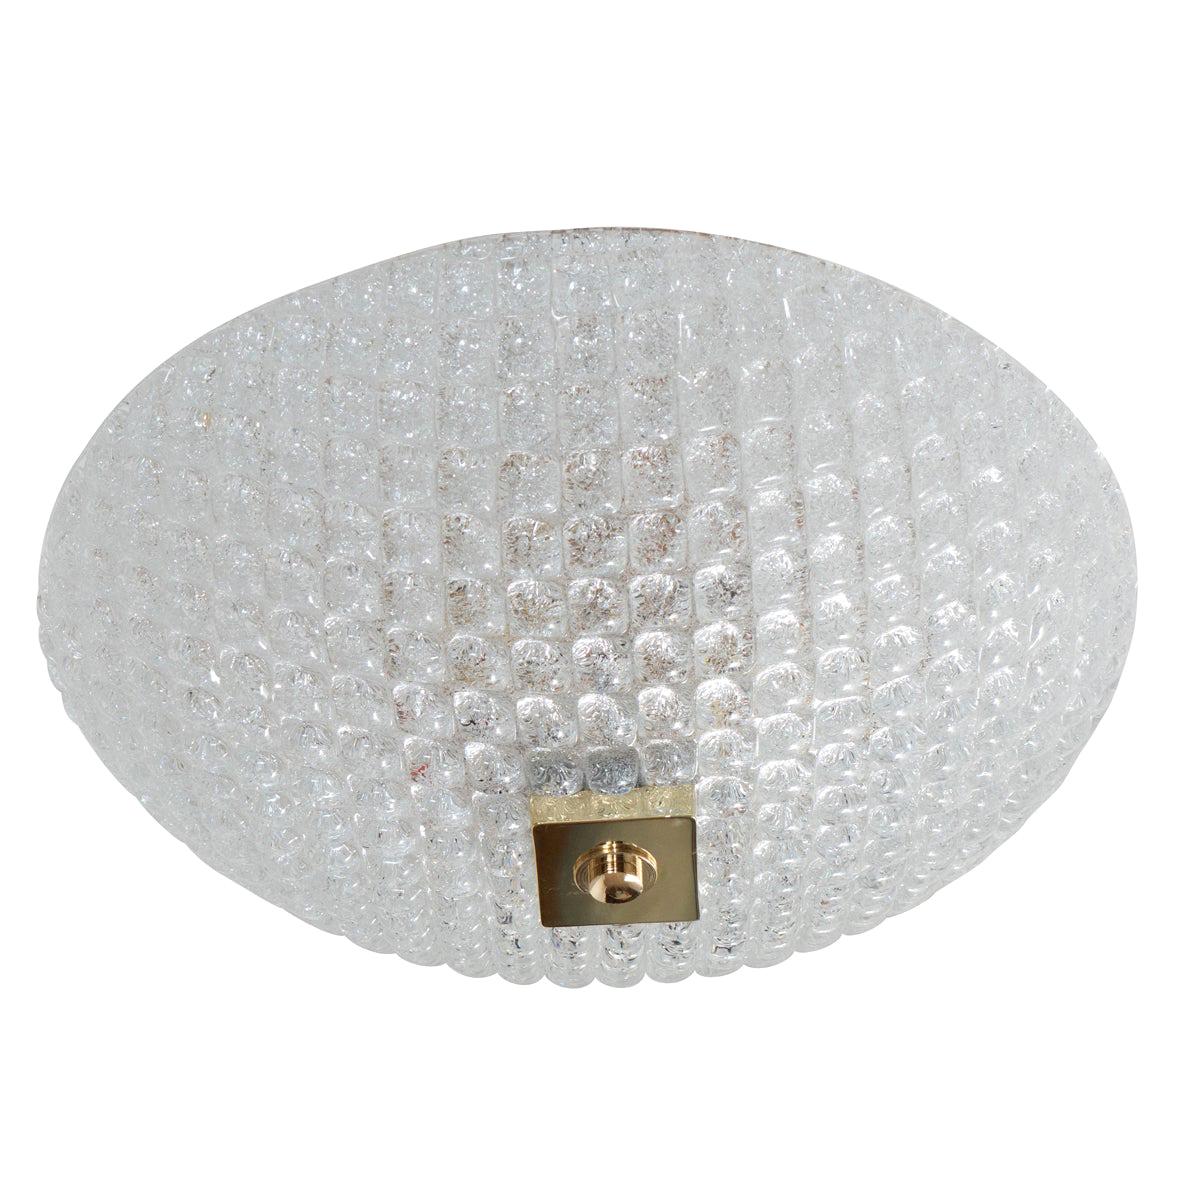 Small Dome Form Textured Glass Flush Mount Fixture For Sale